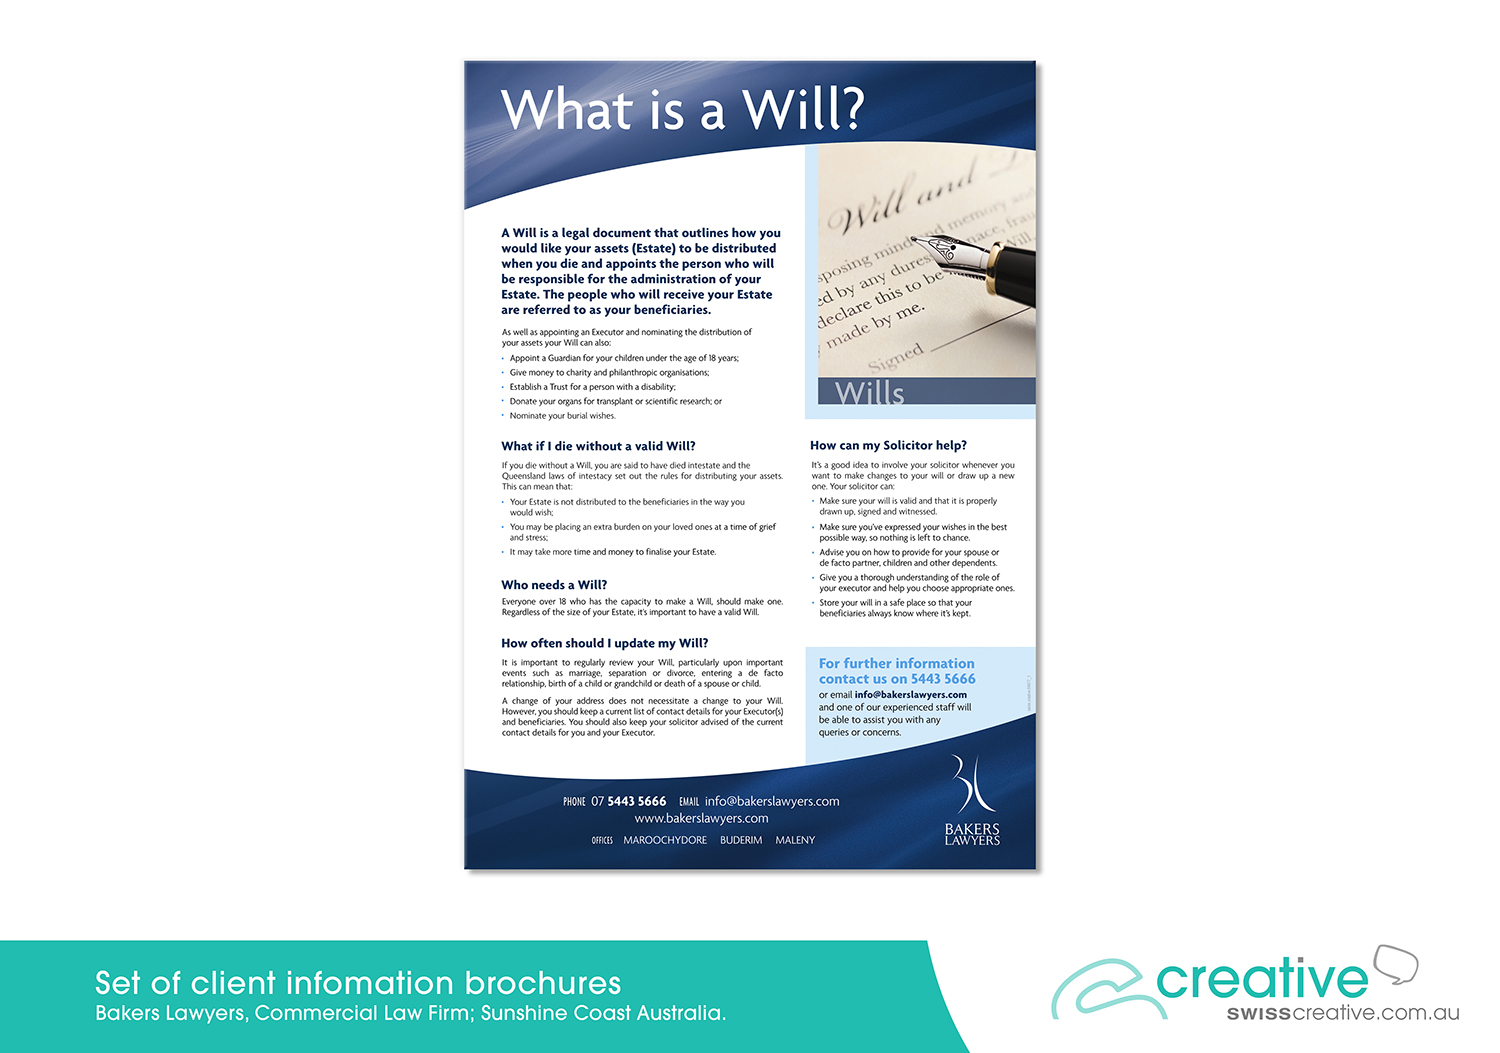 Client information; what is a Will?